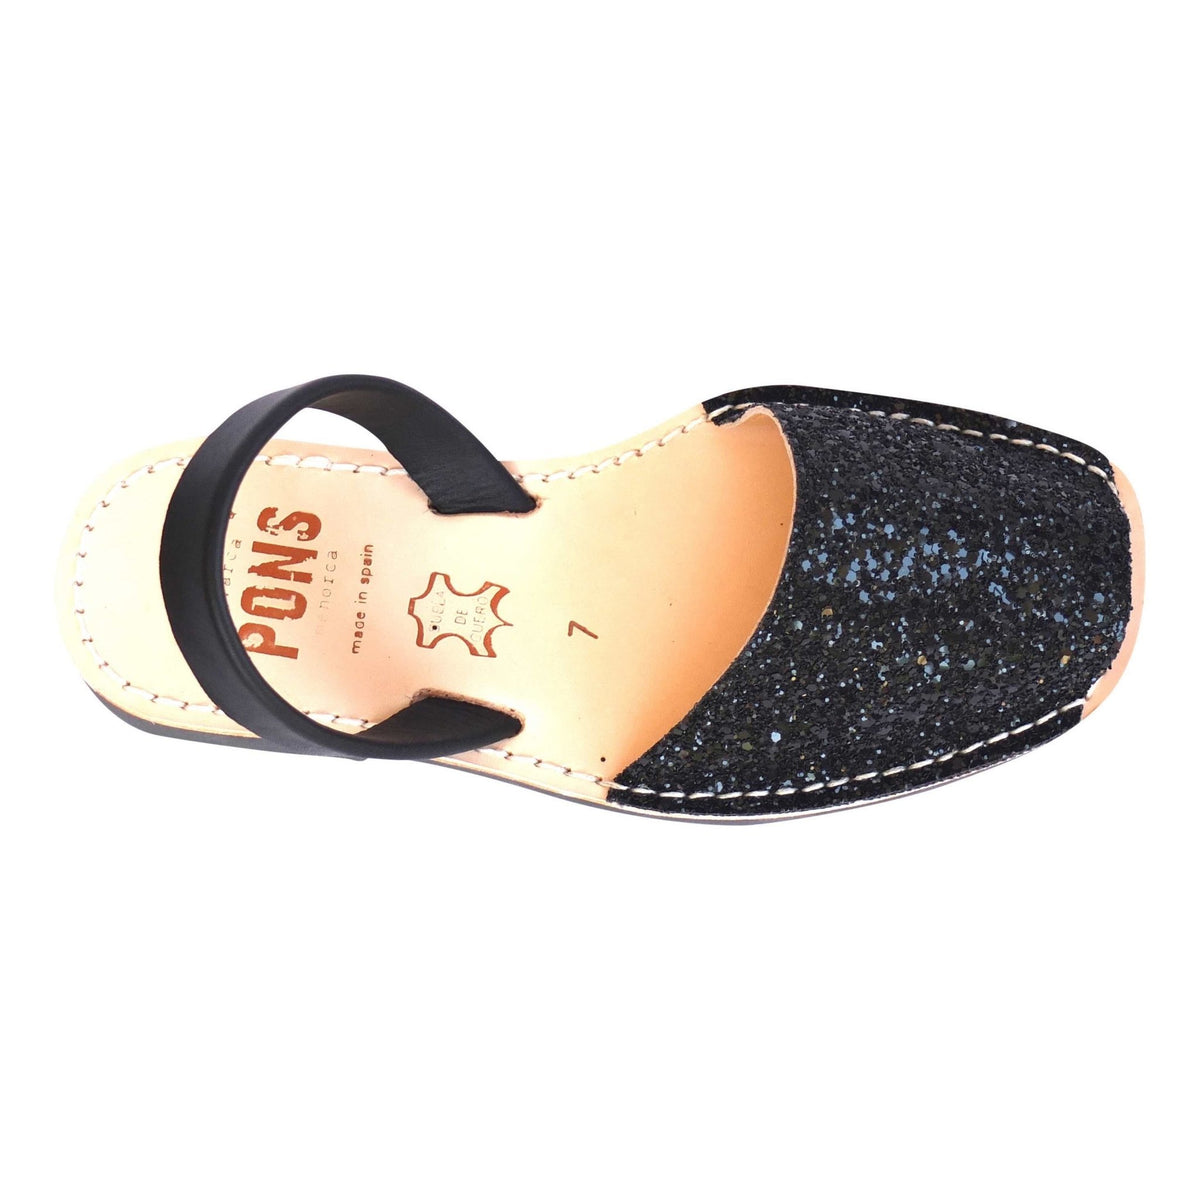 PONS Classic Avarca in Midnight Glitter - Outlet item - Shoeq